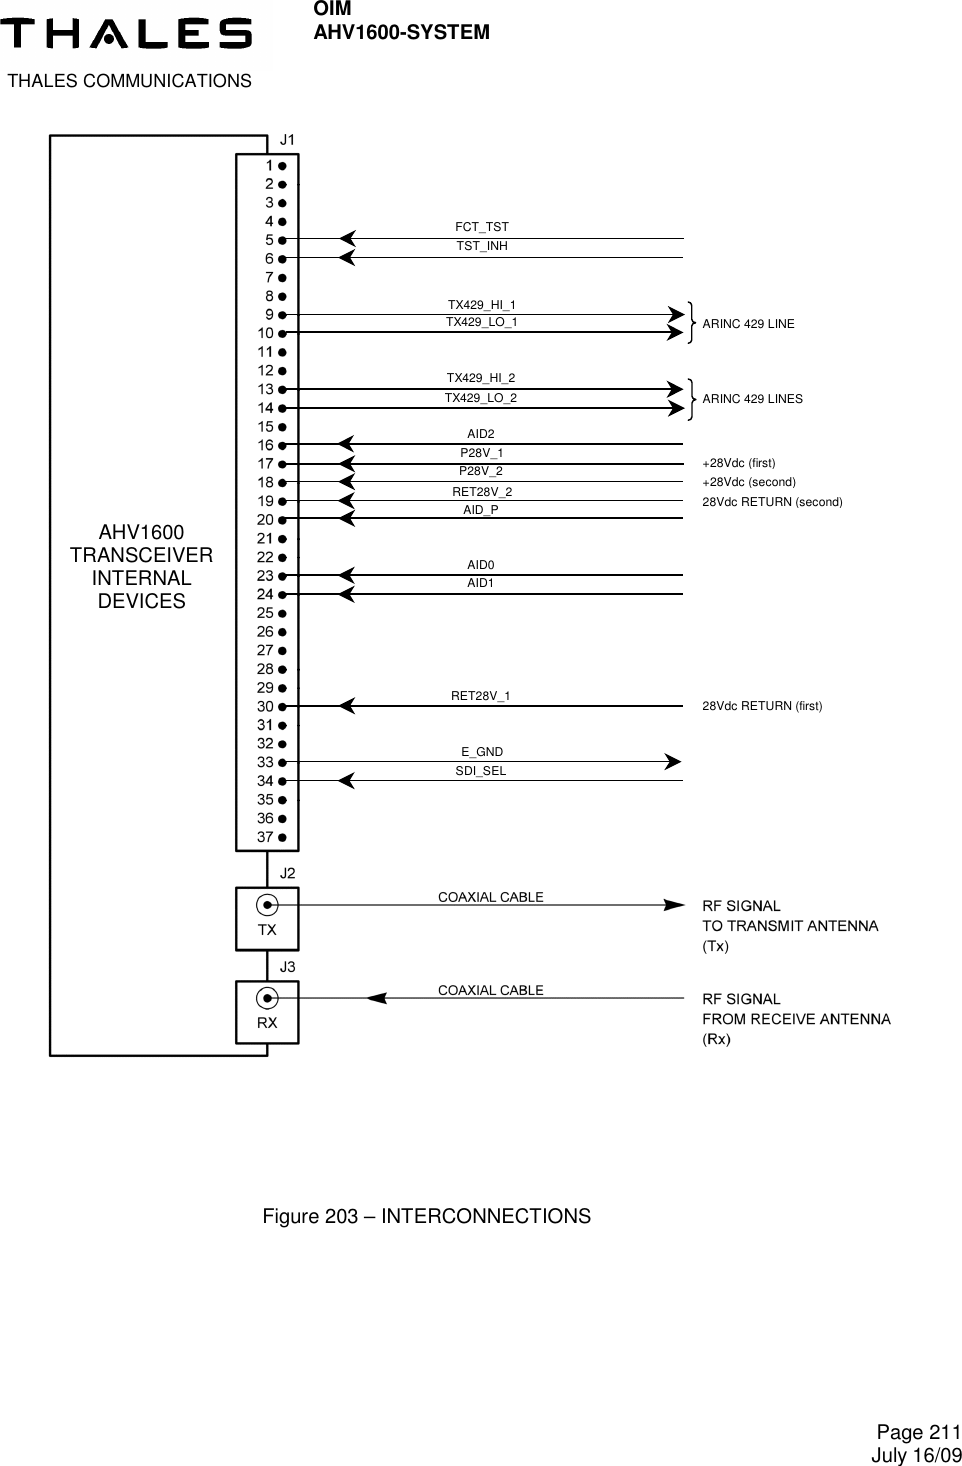  THALES COMMUNICATIONS OIM AHV1600-SYSTEM     Page 211 July 16/09     Figure 203 – INTERCONNECTIONS AHV1600 TRANSCEIVER INTERNAL DEVICES TX429_HI_1 TX429_LO_2  TX429_LO_1 FCT_TST TST_INH TX429_HI_2 P28V_1 P28V_2 RET28V_2 AID_P AID0 AID1 RET28V_1  E_GND  SDI_SEL ARINC 429 LINE ARINC 429 LINES +28Vdc (first) +28Vdc (second) 28Vdc RETURN (second) 28Vdc RETURN (first) AID2 